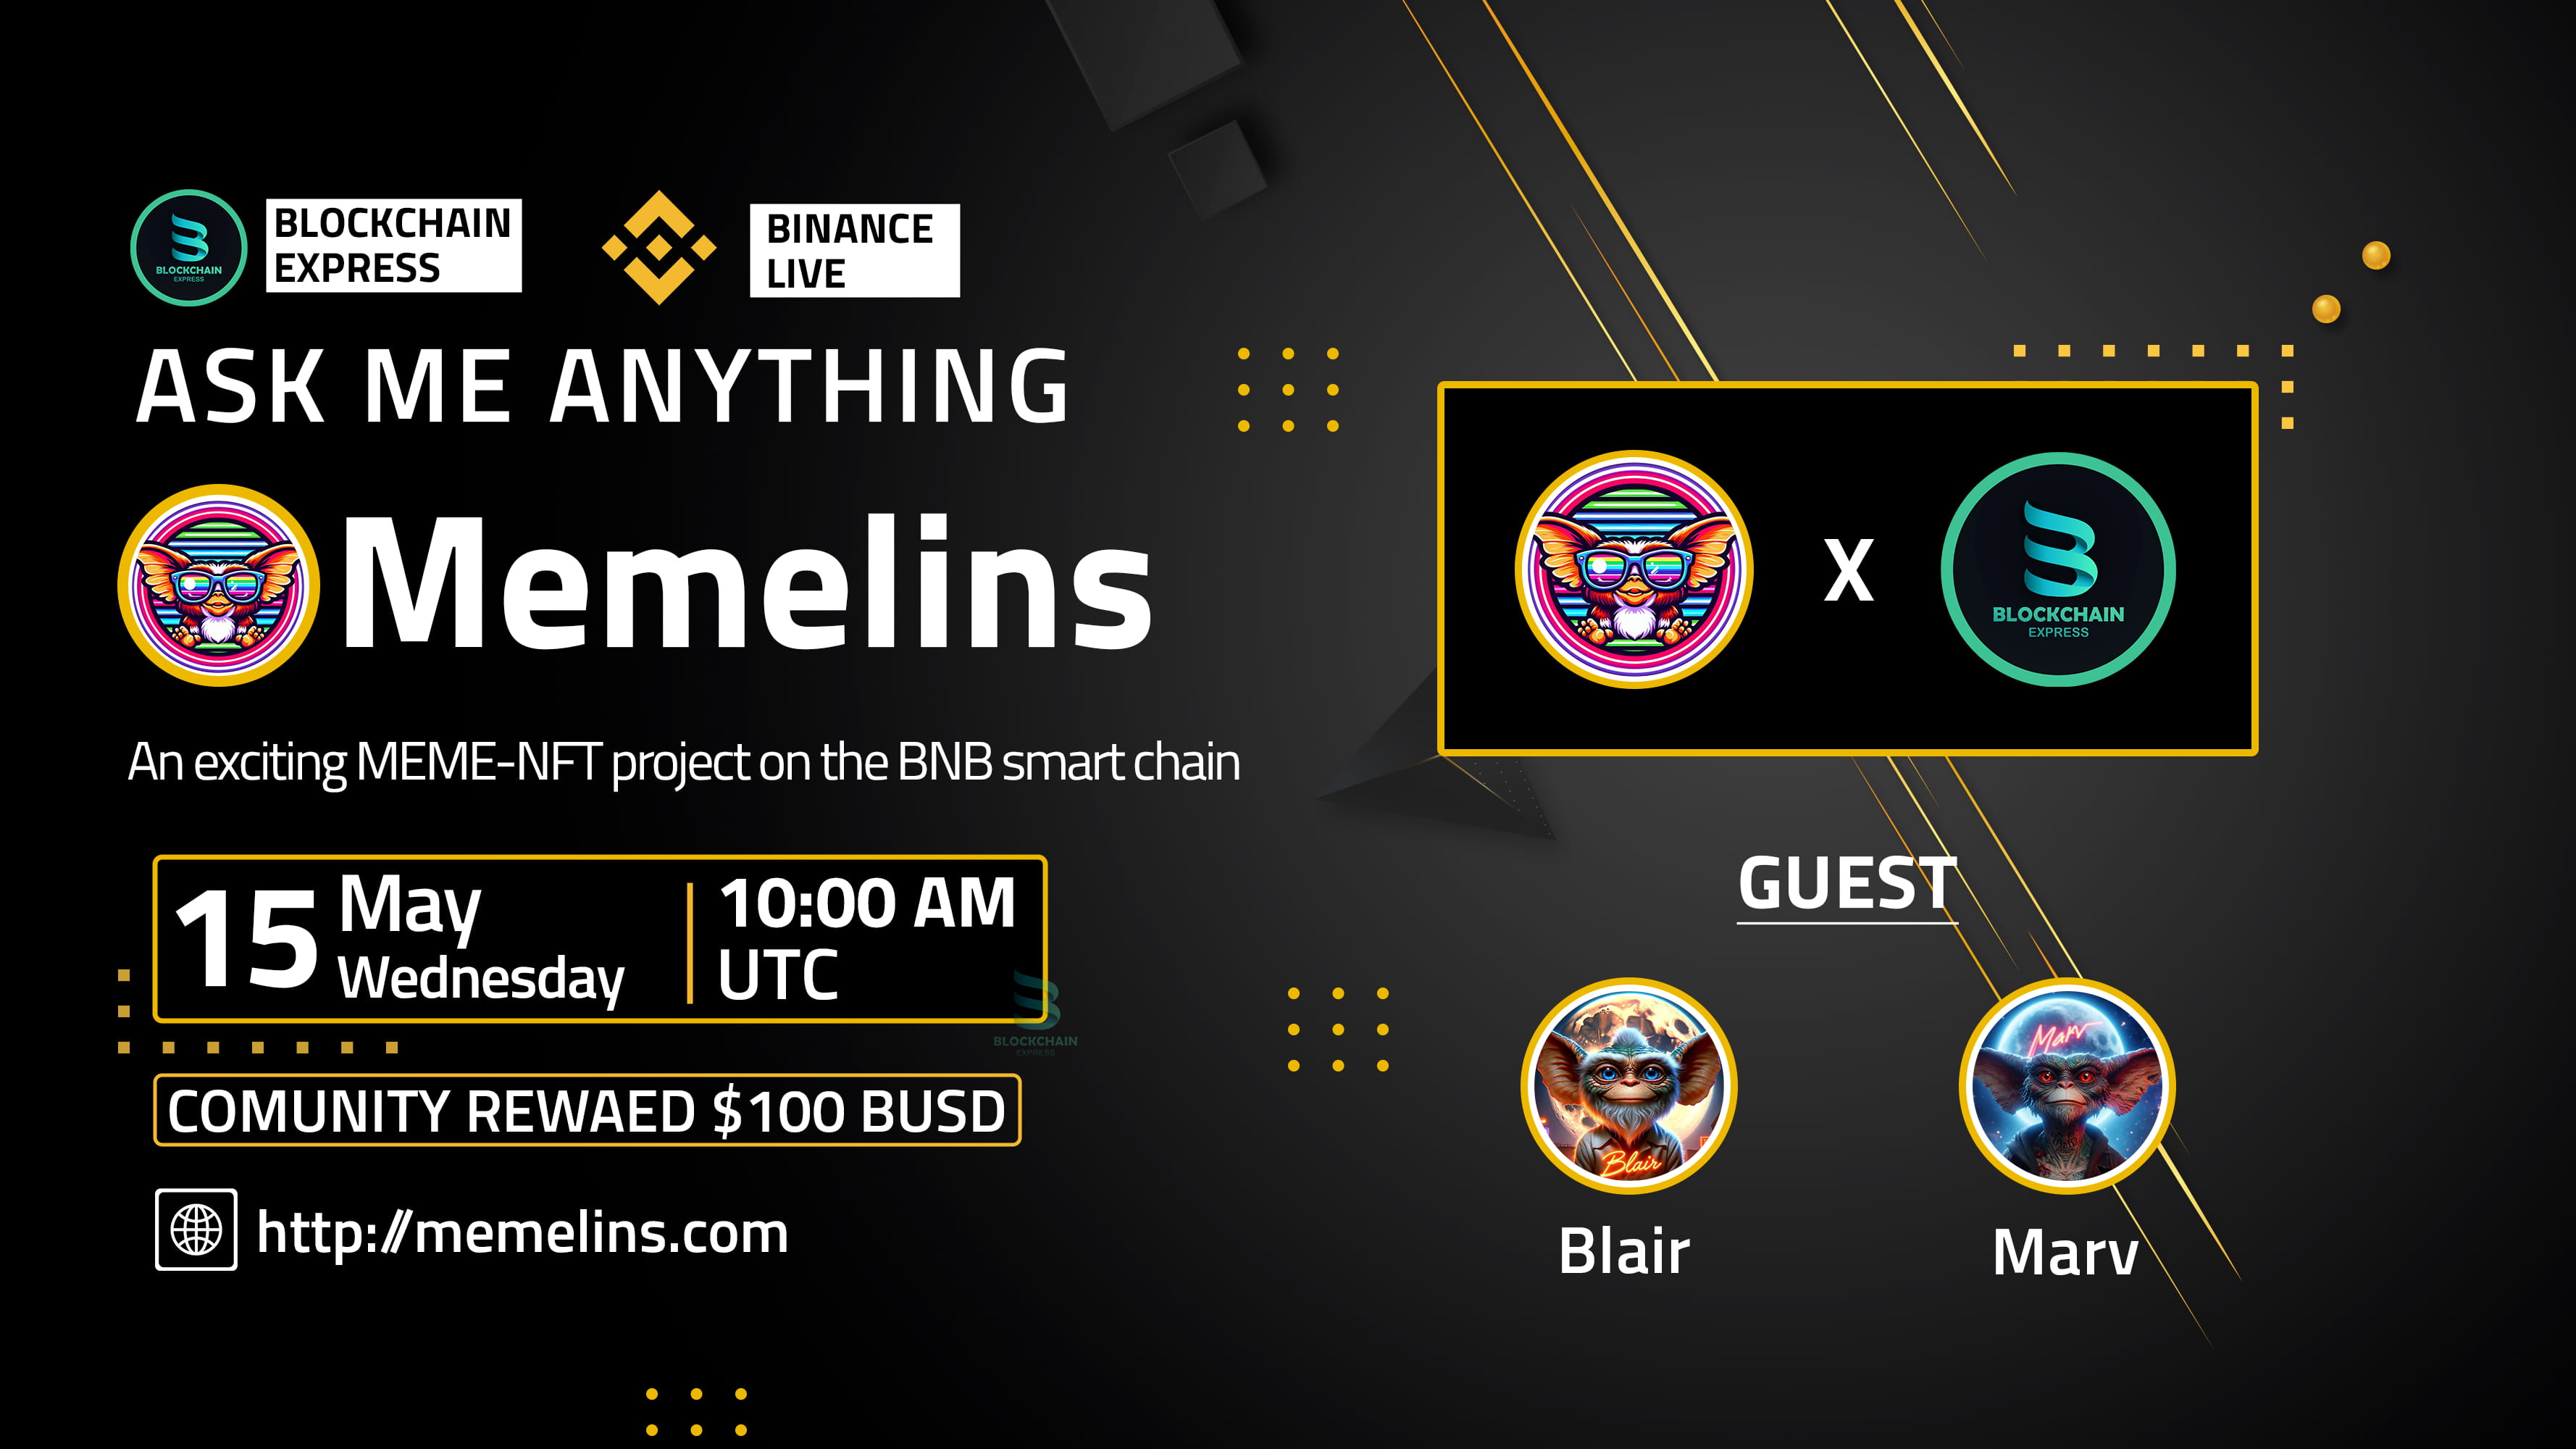 ₿lockchain Express will be hosting an AMA session with" Memelins "